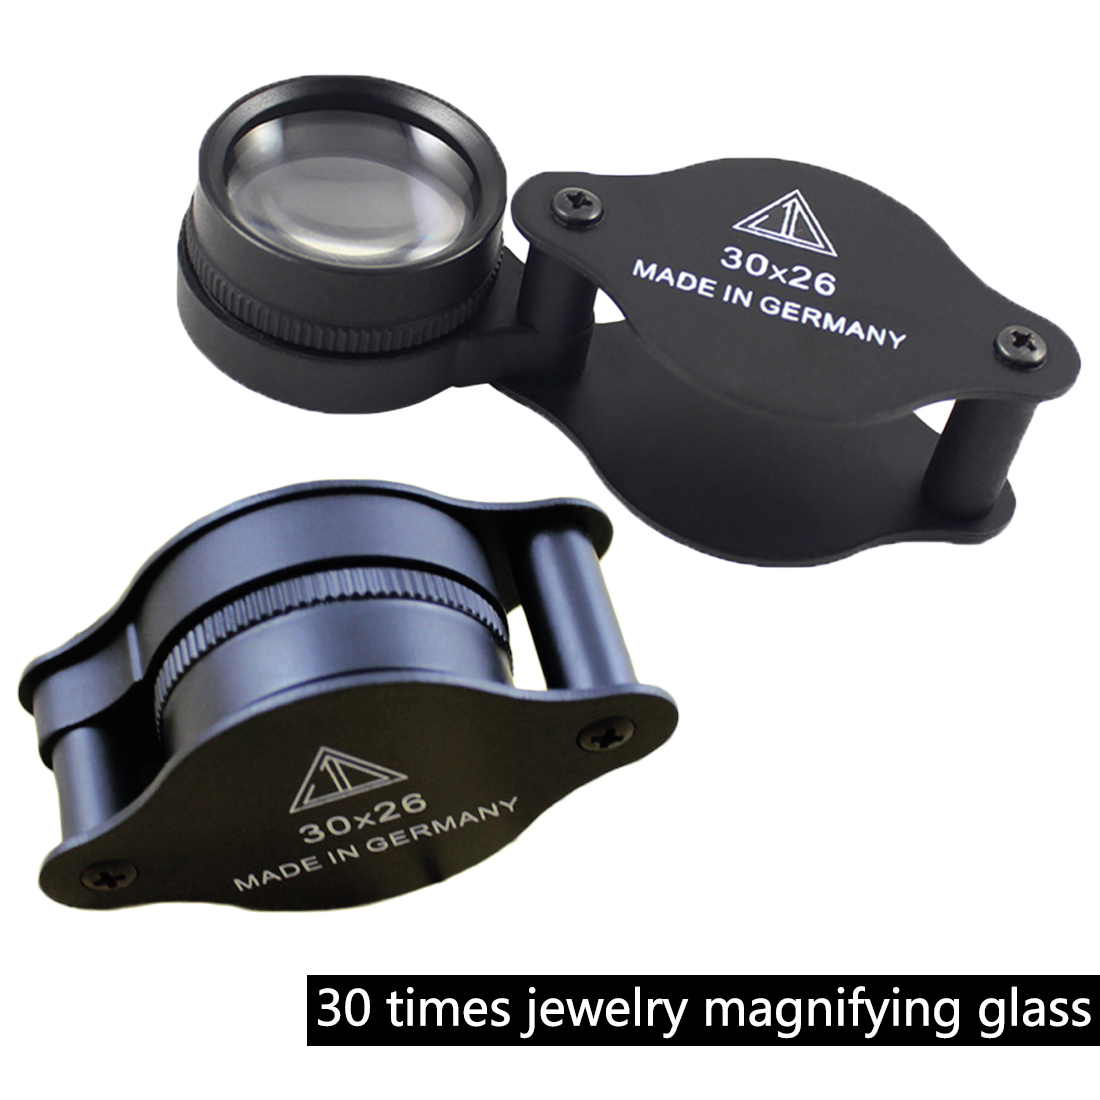 1pc 30x26mm Jeweler Optics Loupes Magnifier Glass Magnifying Lens  Microscope For Coins Stamps Jewelry Lupe - Price history & Review, AliExpress Seller - Shop1958674 Store